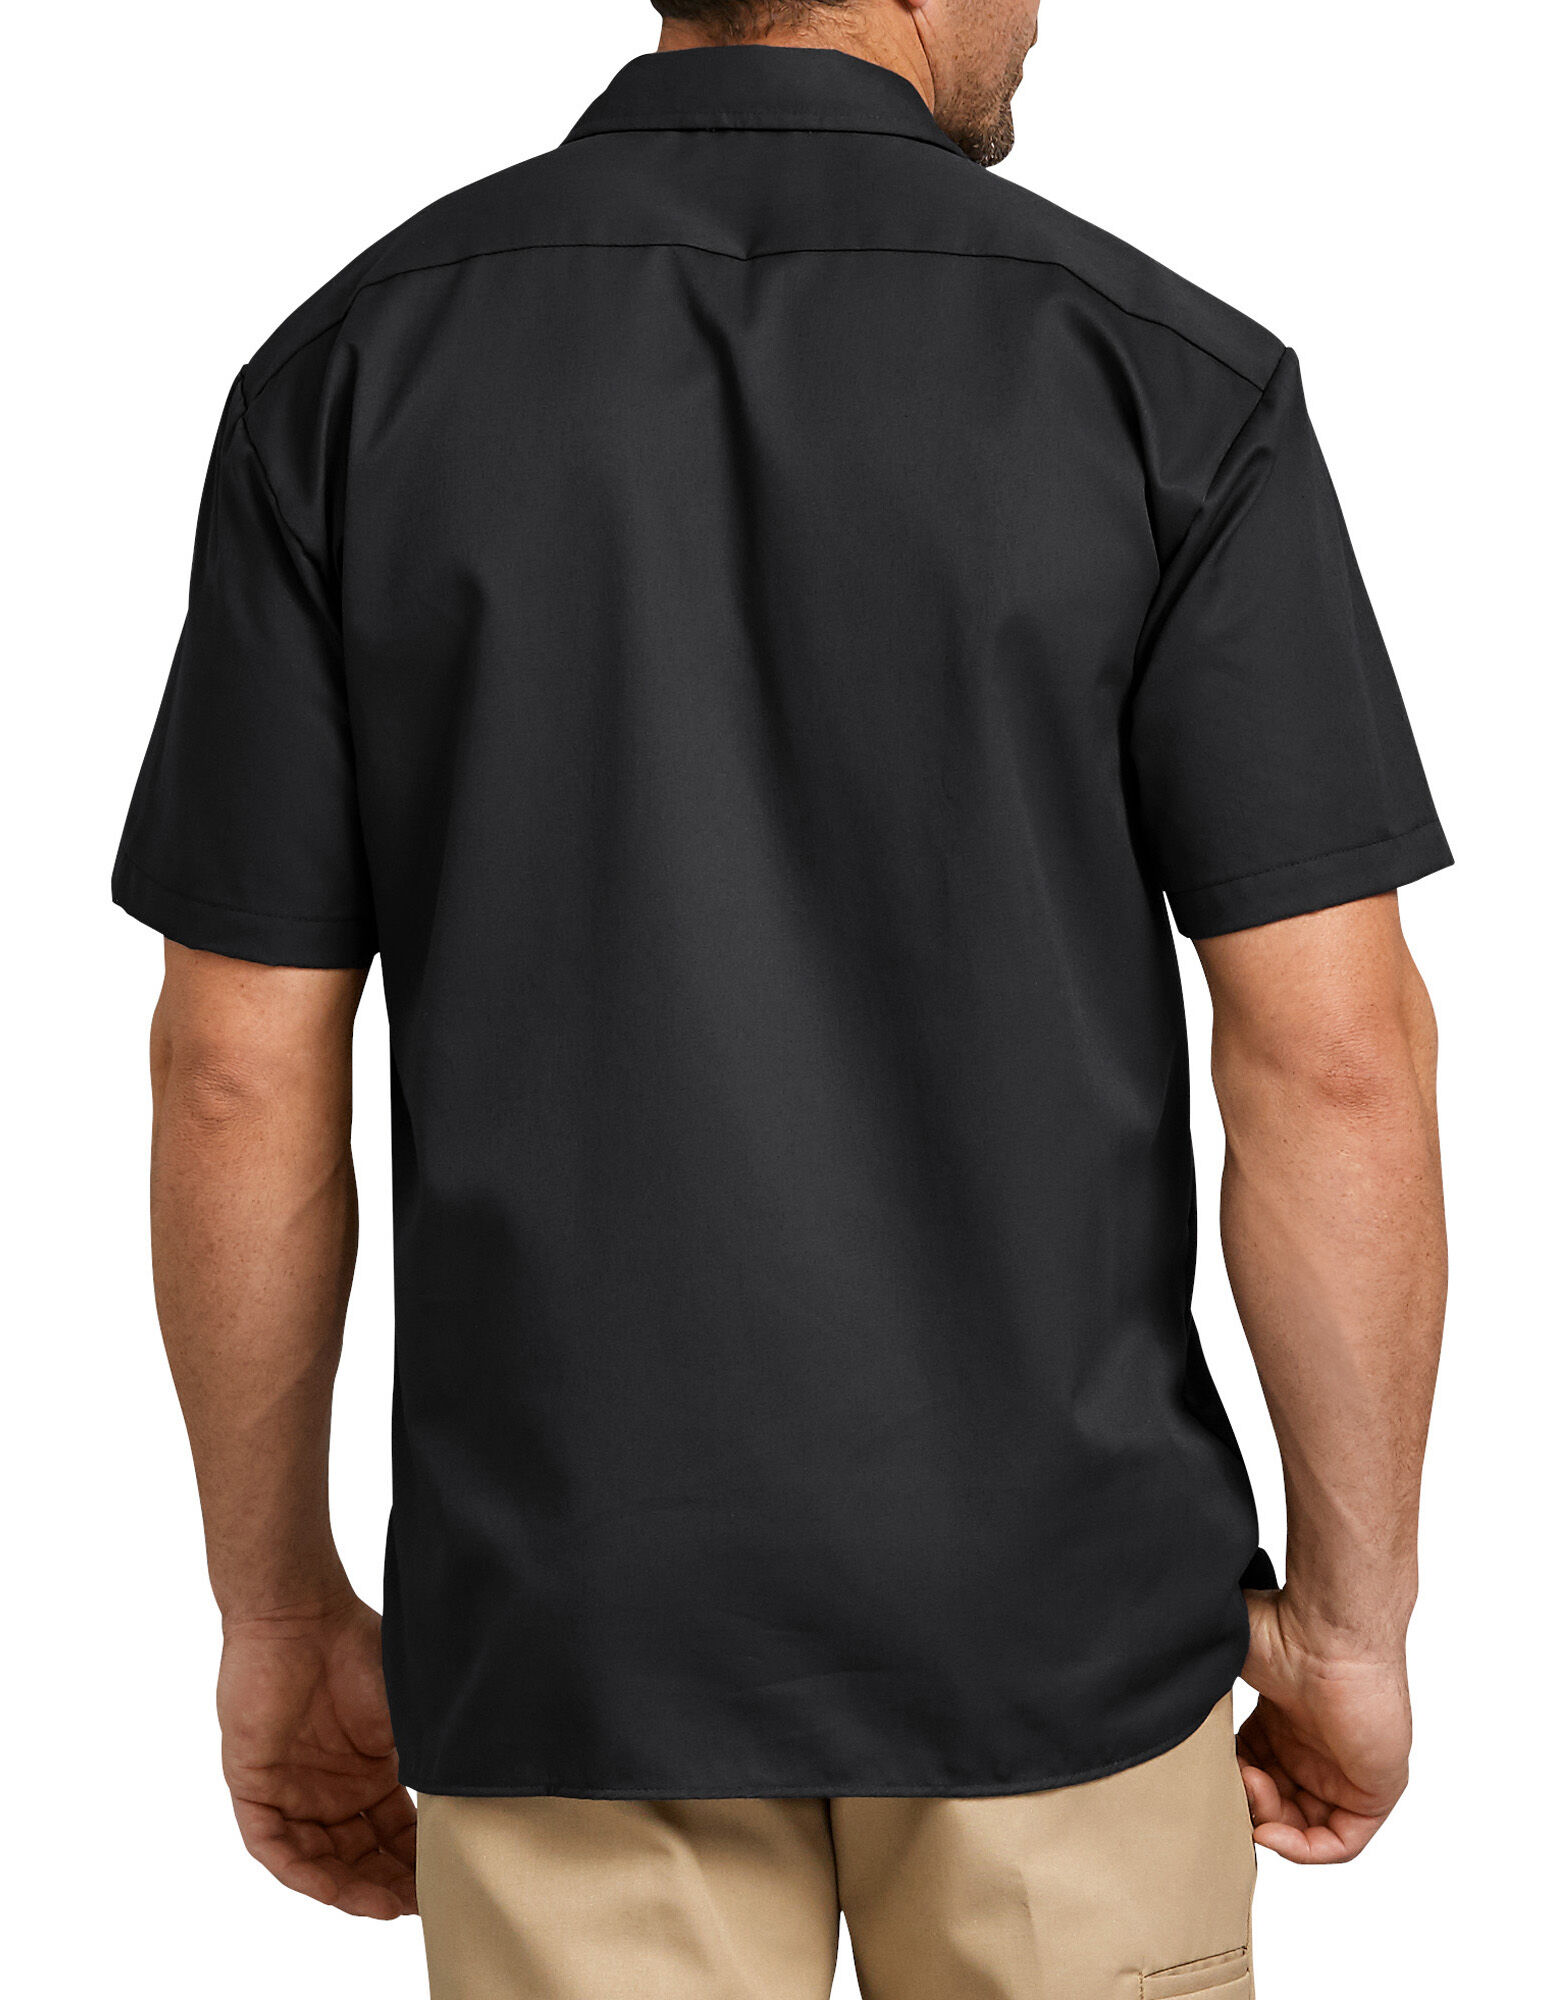 V8 Speed and Resto Shop Black Dickies Work Shirt - V8 Speed and Resto Shop